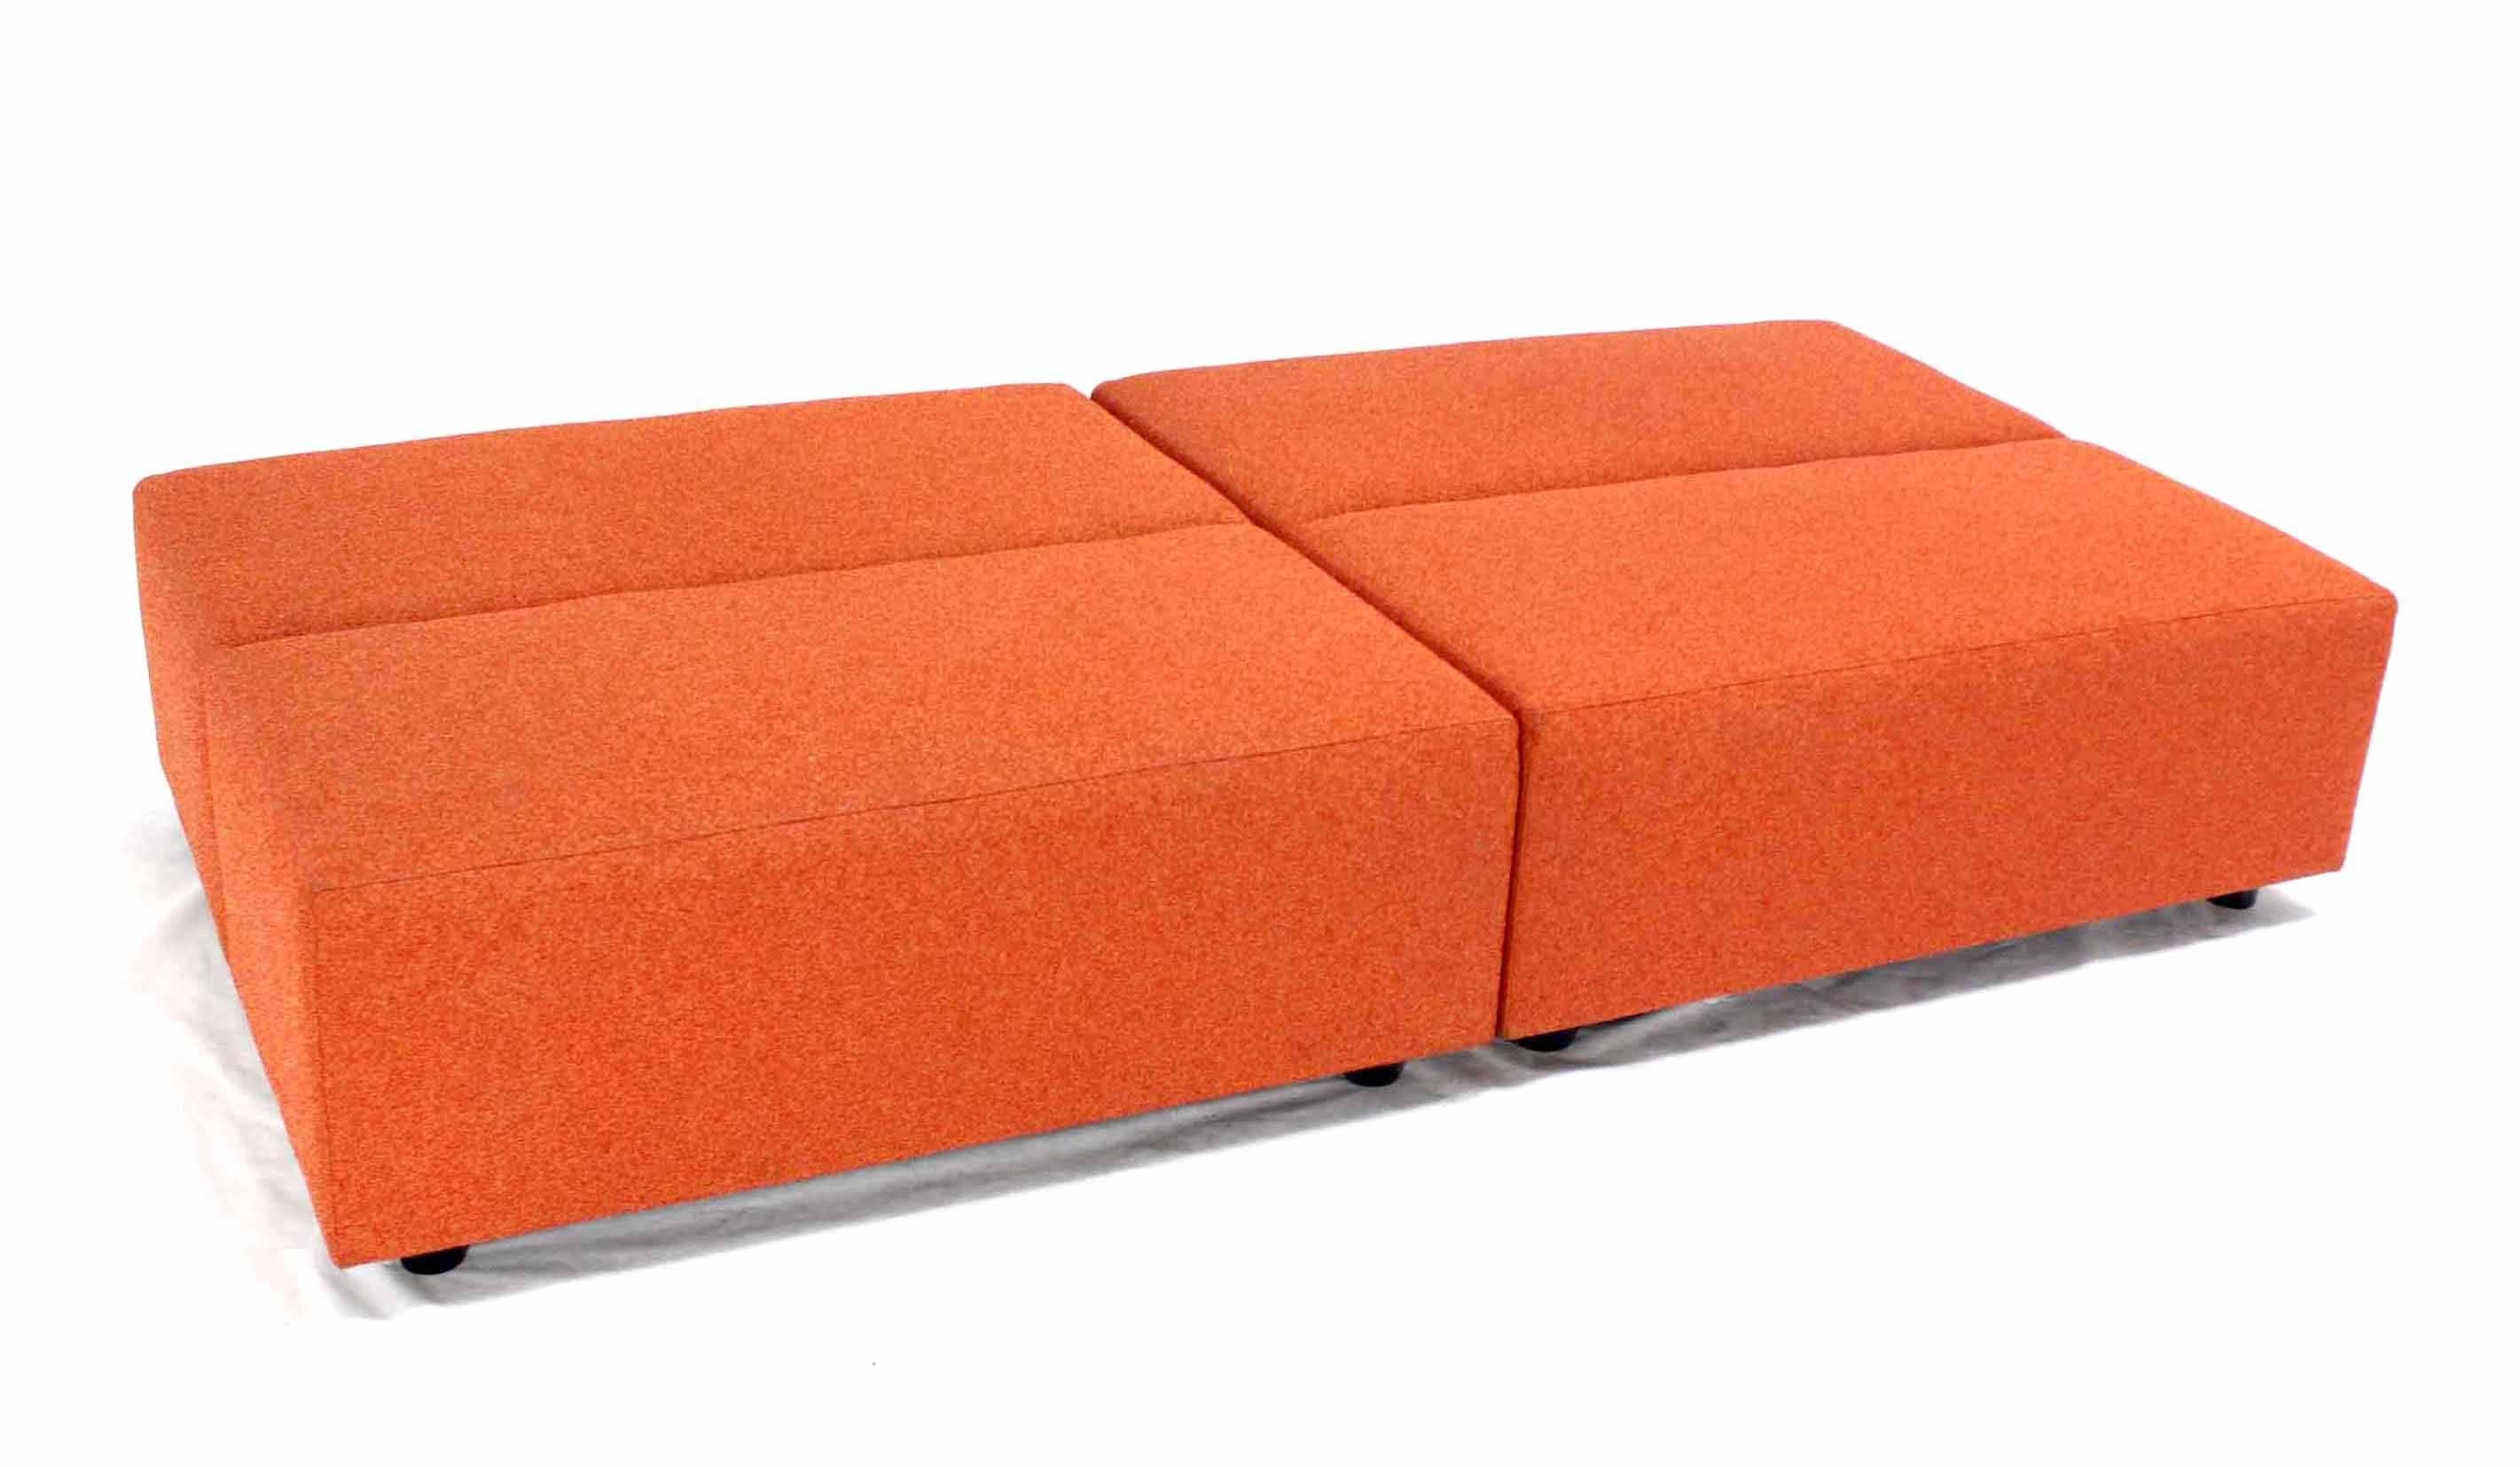 American Pair of Large Oversize 4x4 Orange Upholstery Square Benches by Steelcase Sofa For Sale